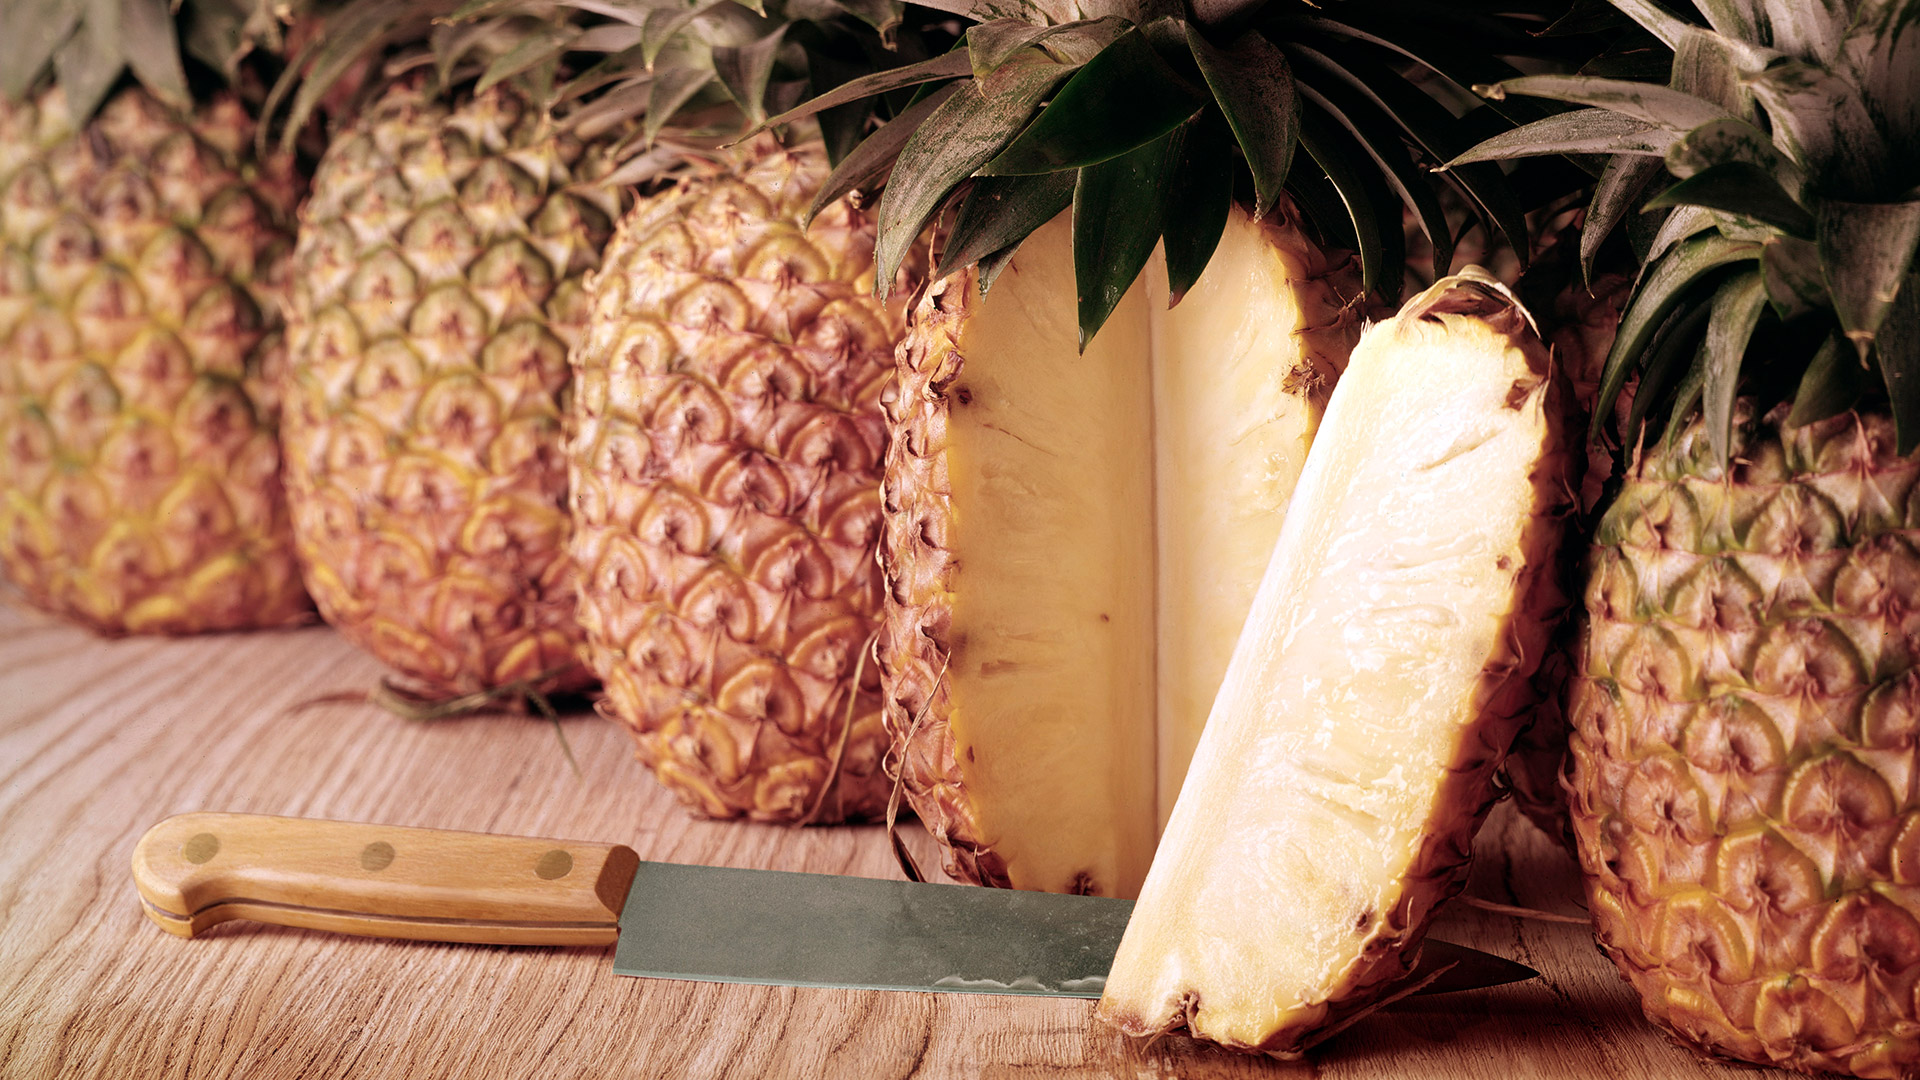 Pineapples with cut pineapple, with a kitchen knife, against a wood background, 2011. (Photo by Tom Kelley/Getty Images)